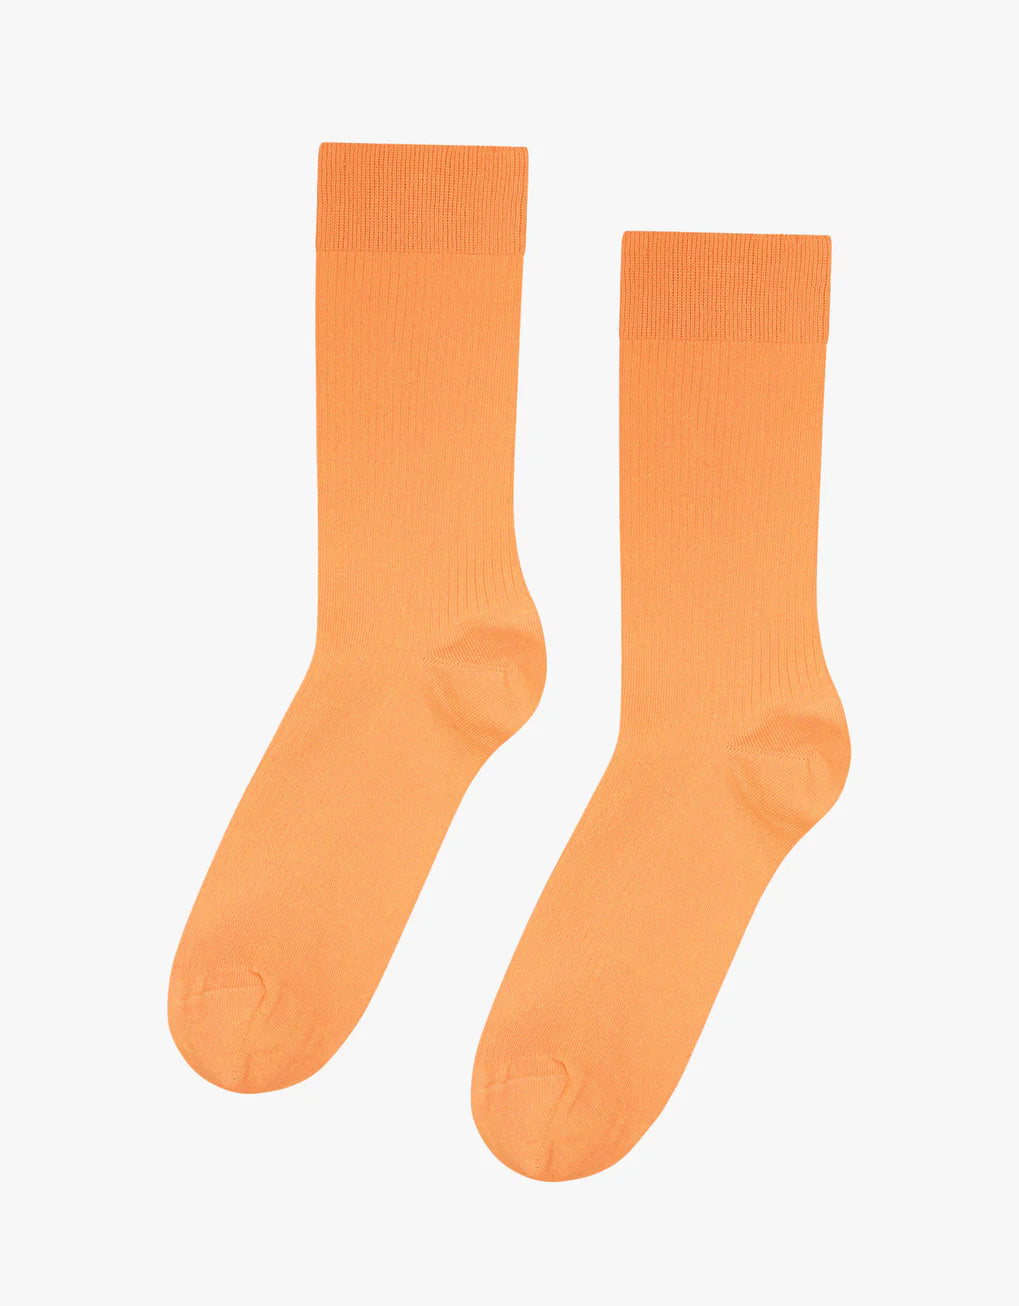 A pair of Colorful Standard Classic Organic Socks on a white background.